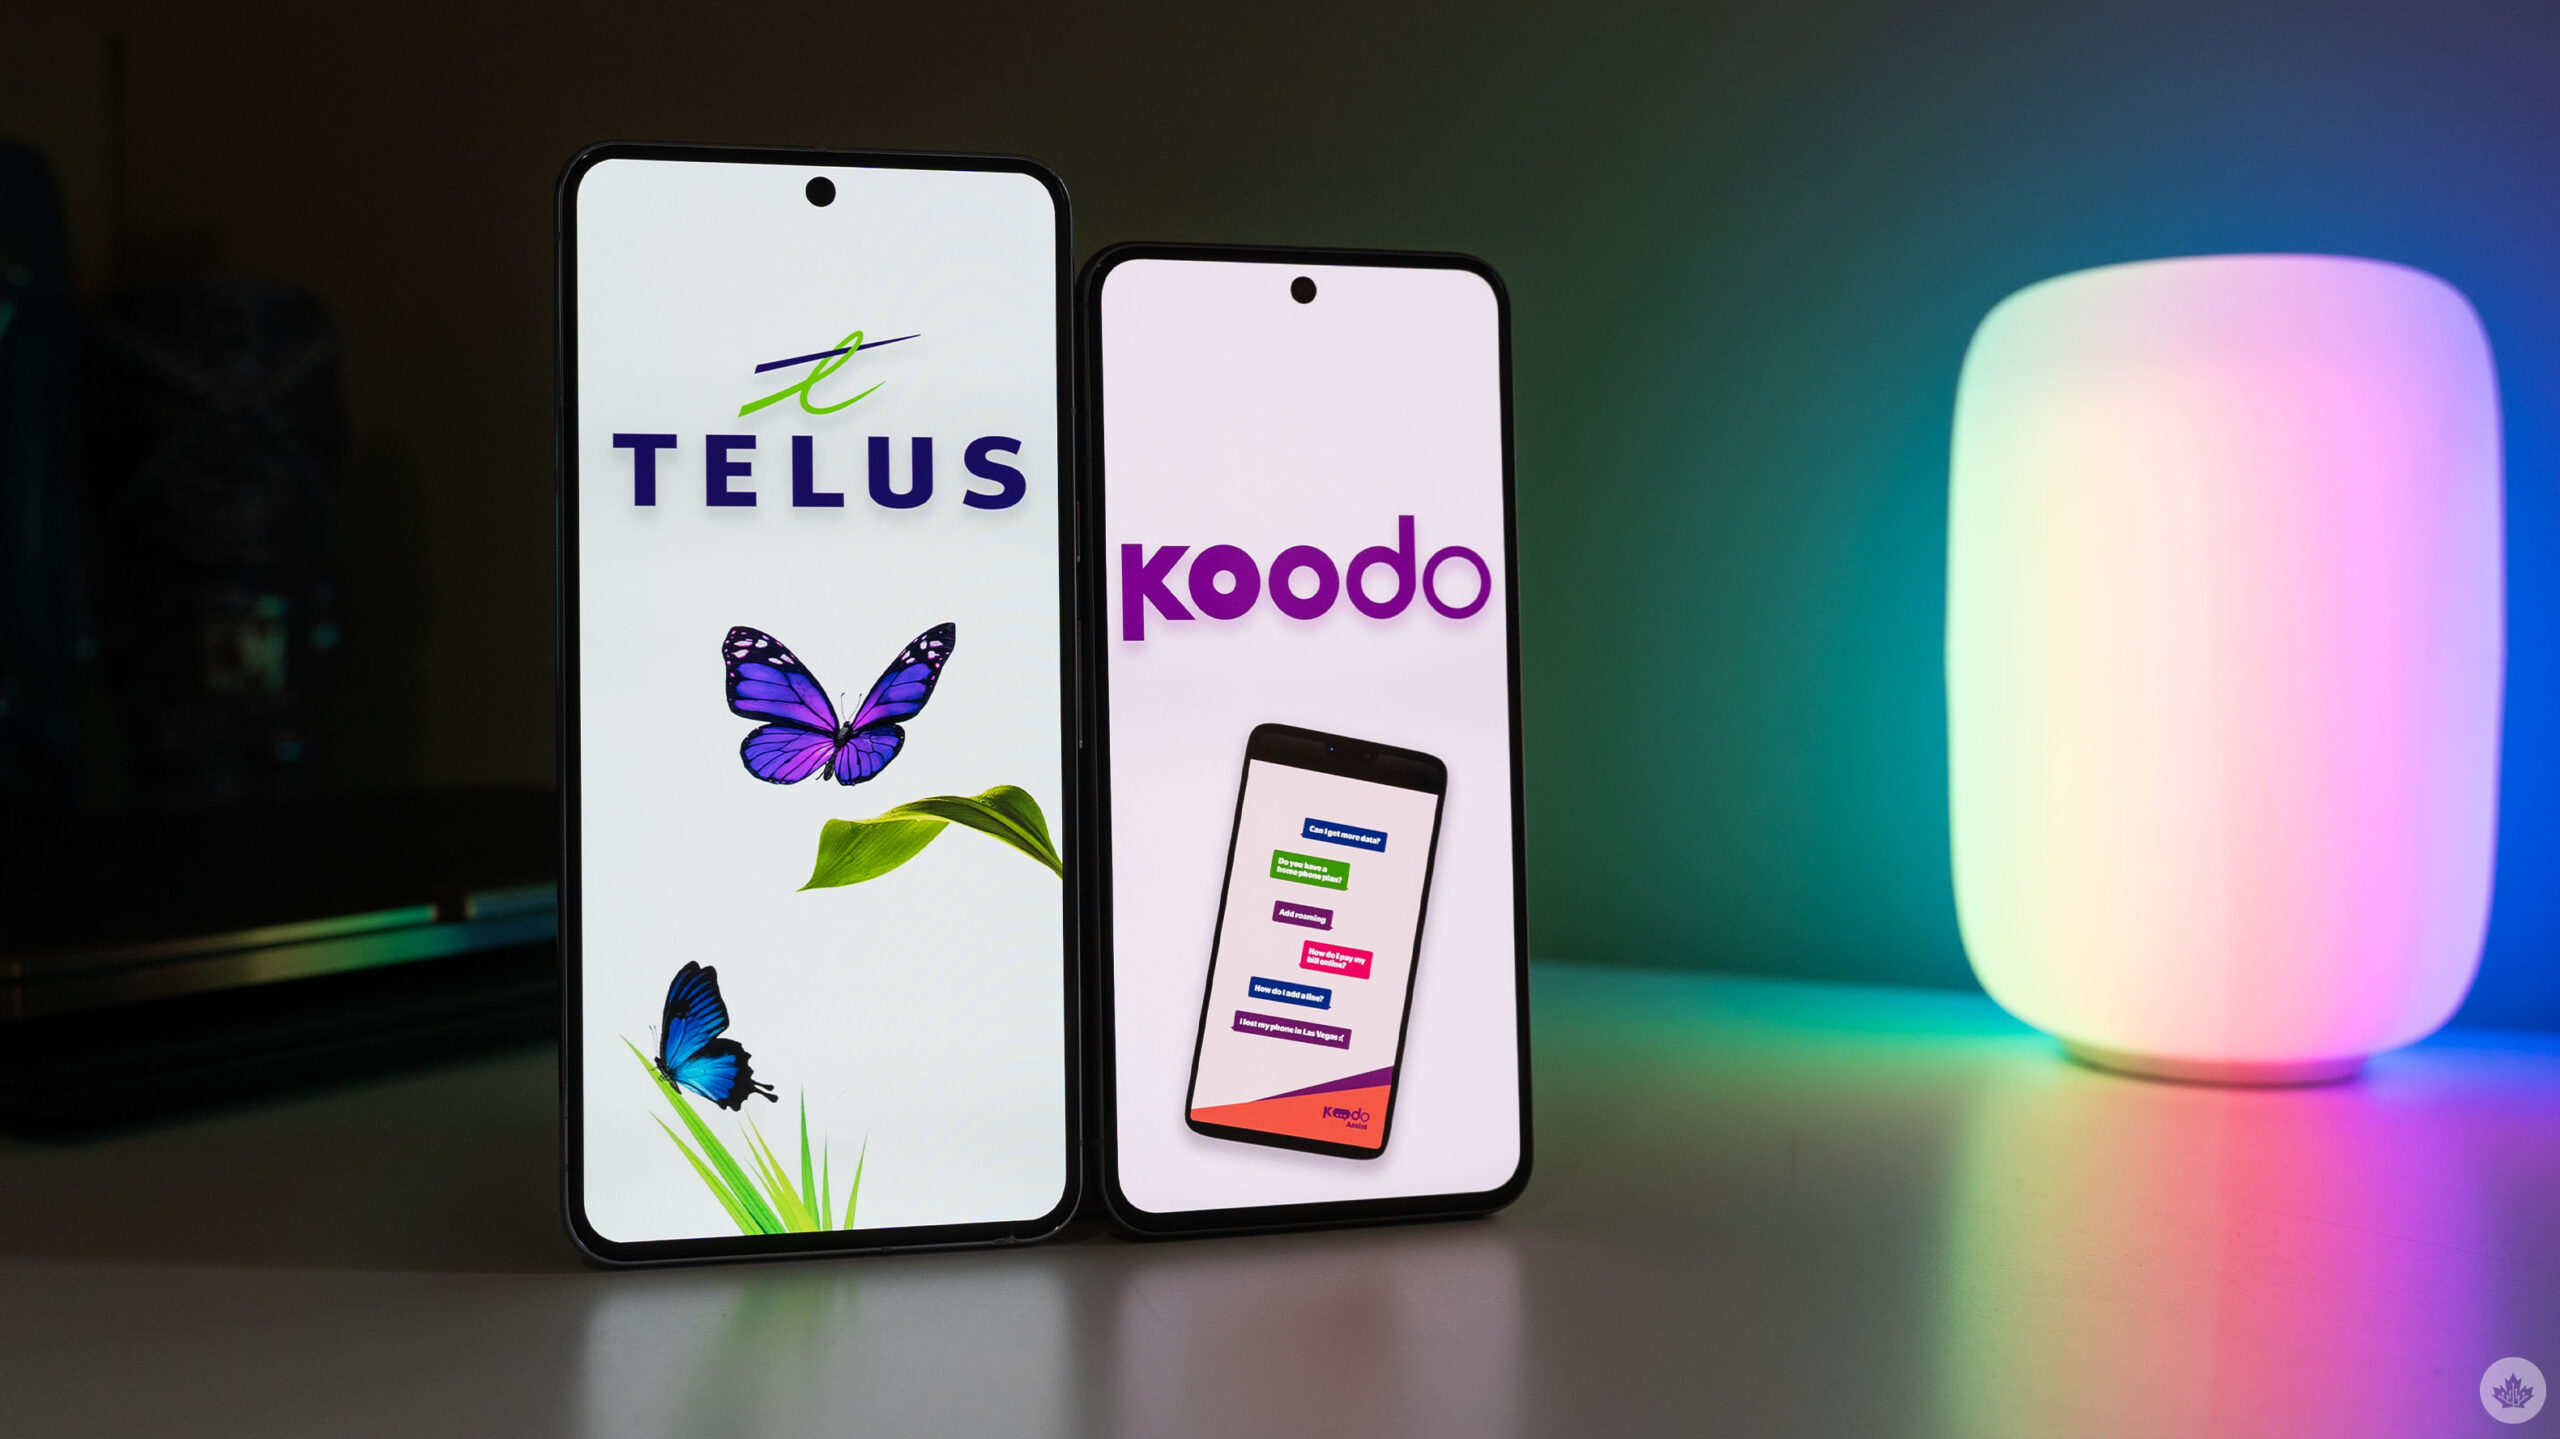 Koodo rolls out 75GB plan that costs less than what Telus is advertising